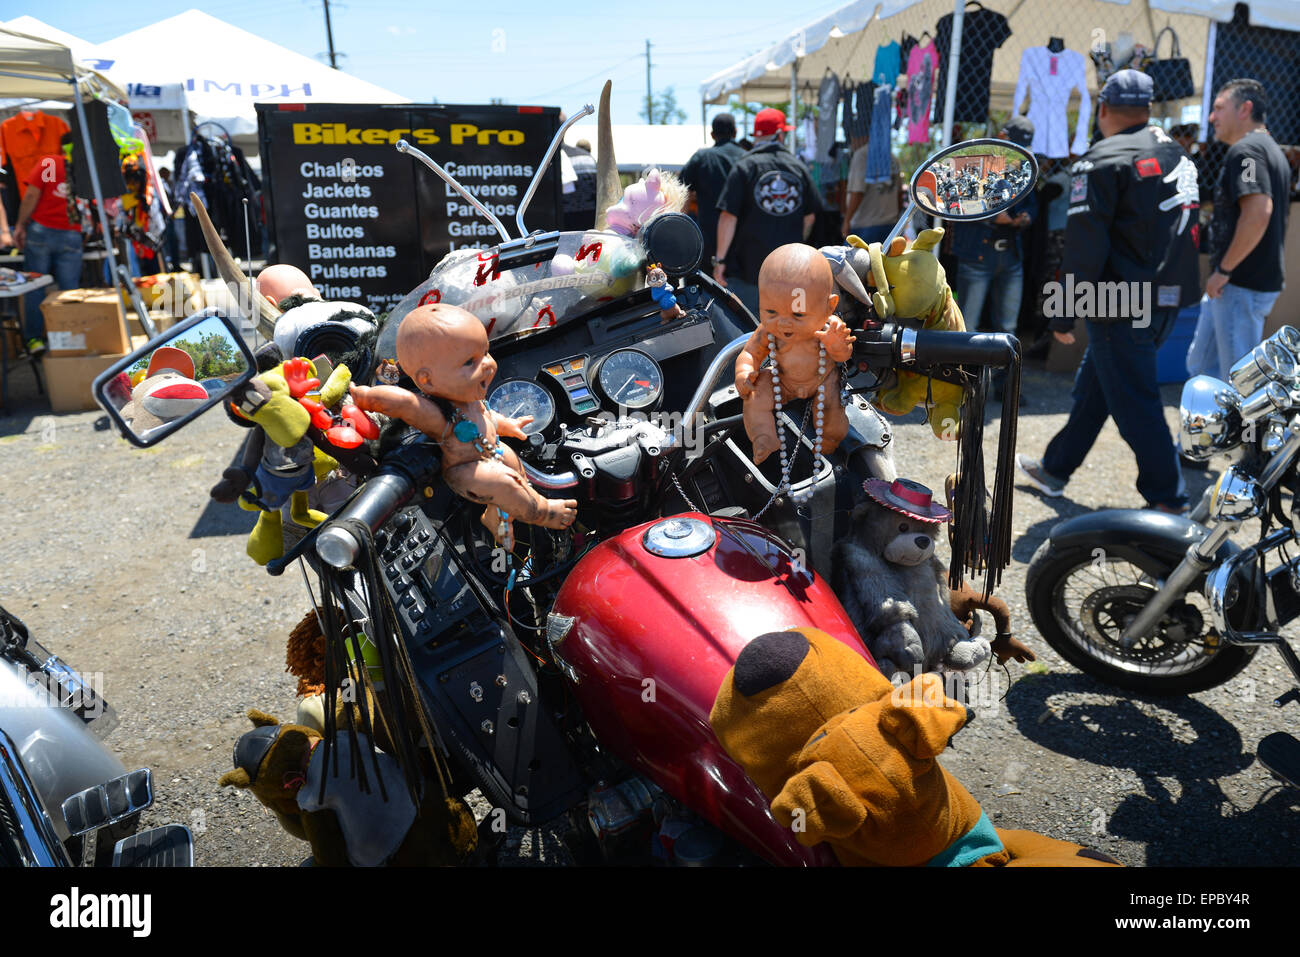 Biker event in Ponce, Puerto Rico. Caribbean Island. USA territory. Stock Photo